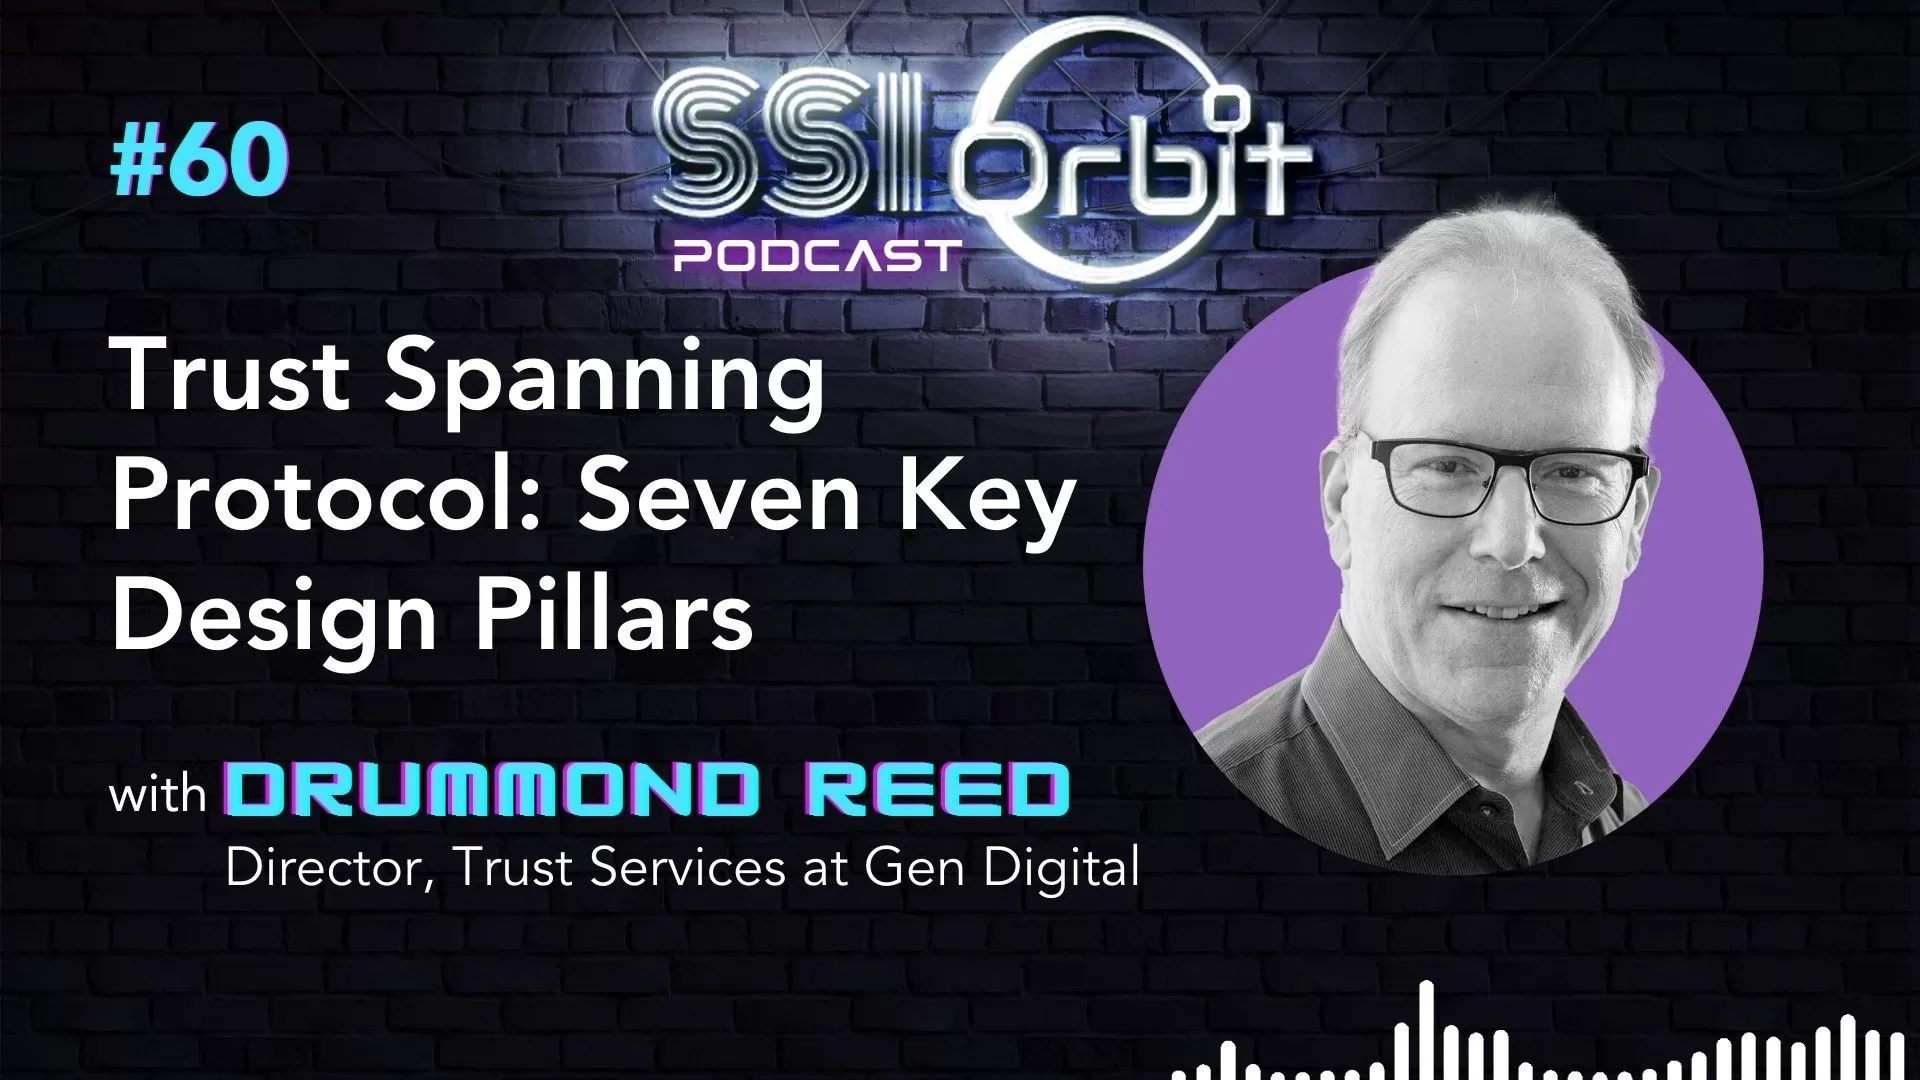 Trust Spanning Protocol: Seven Key Pillars (with Drummond Reed)